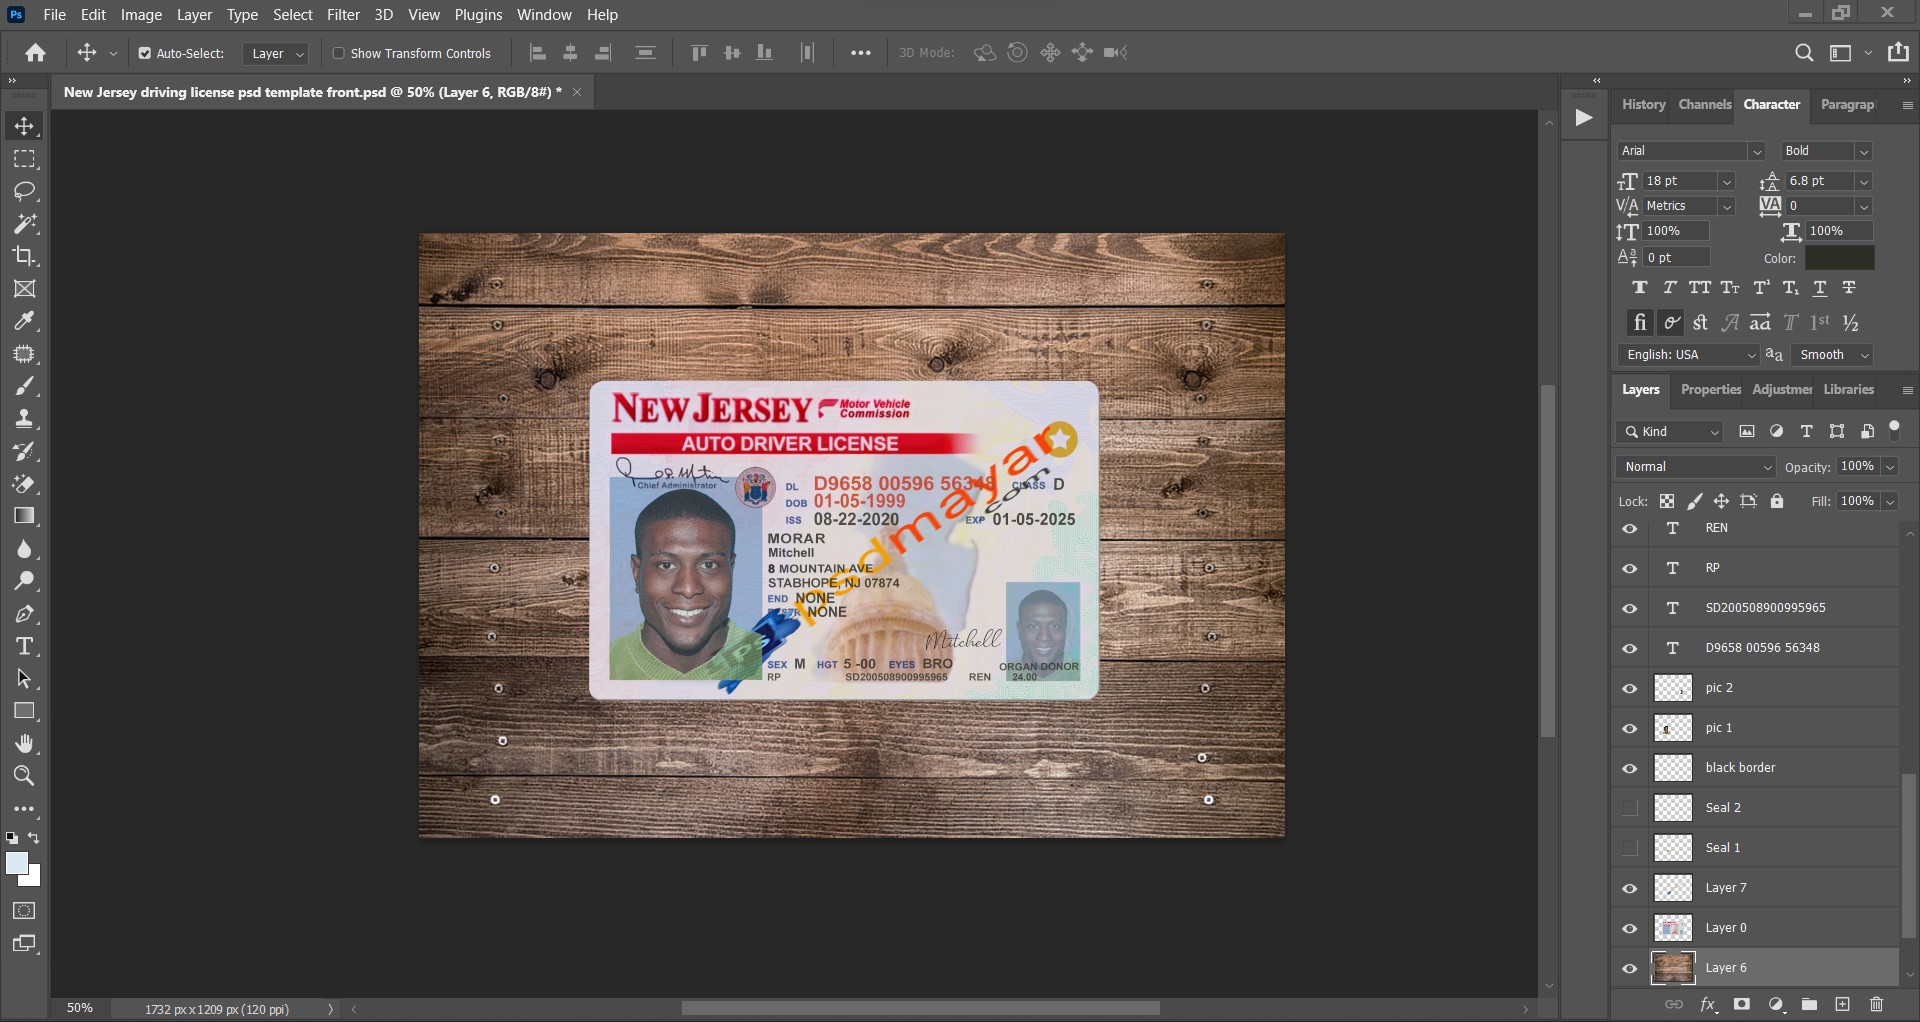 New Jersey driving license psd template